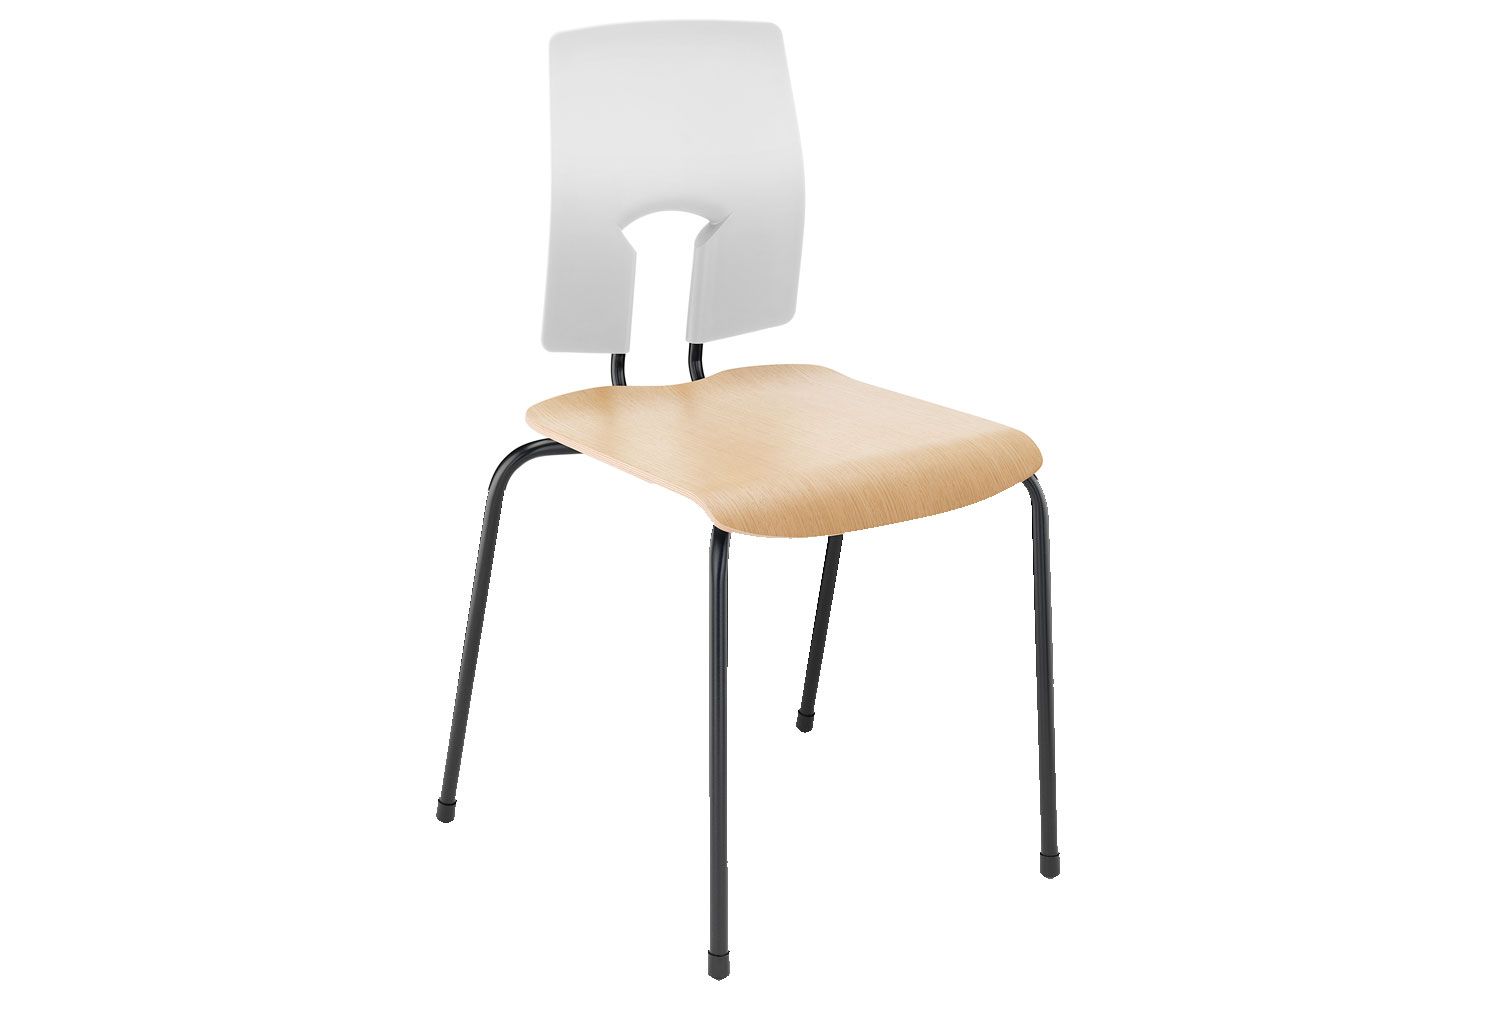 Qty 8 - Hille SE Ergonomic Classroom Chair With Wooden Seat, 14+ Years - 41wx44dx46h (cm), Black Frame, Slate